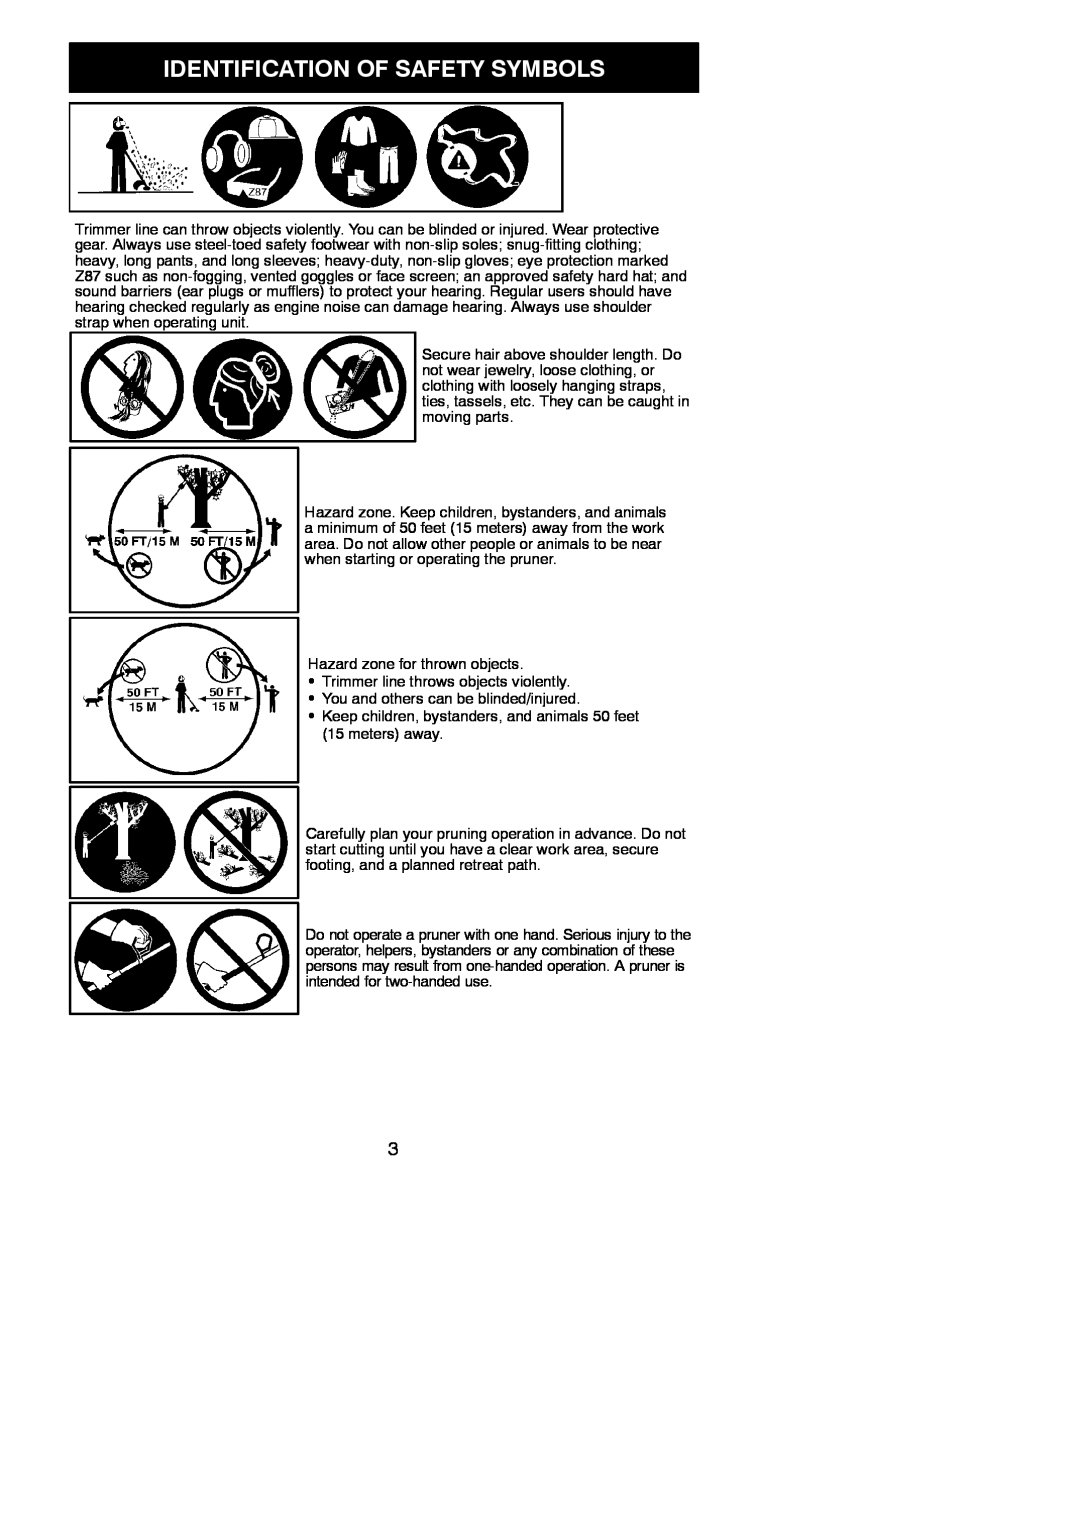 Poulan 115224926, PP338PT instruction manual Identification Of Safety Symbols, Hazard zone for thrown objects 